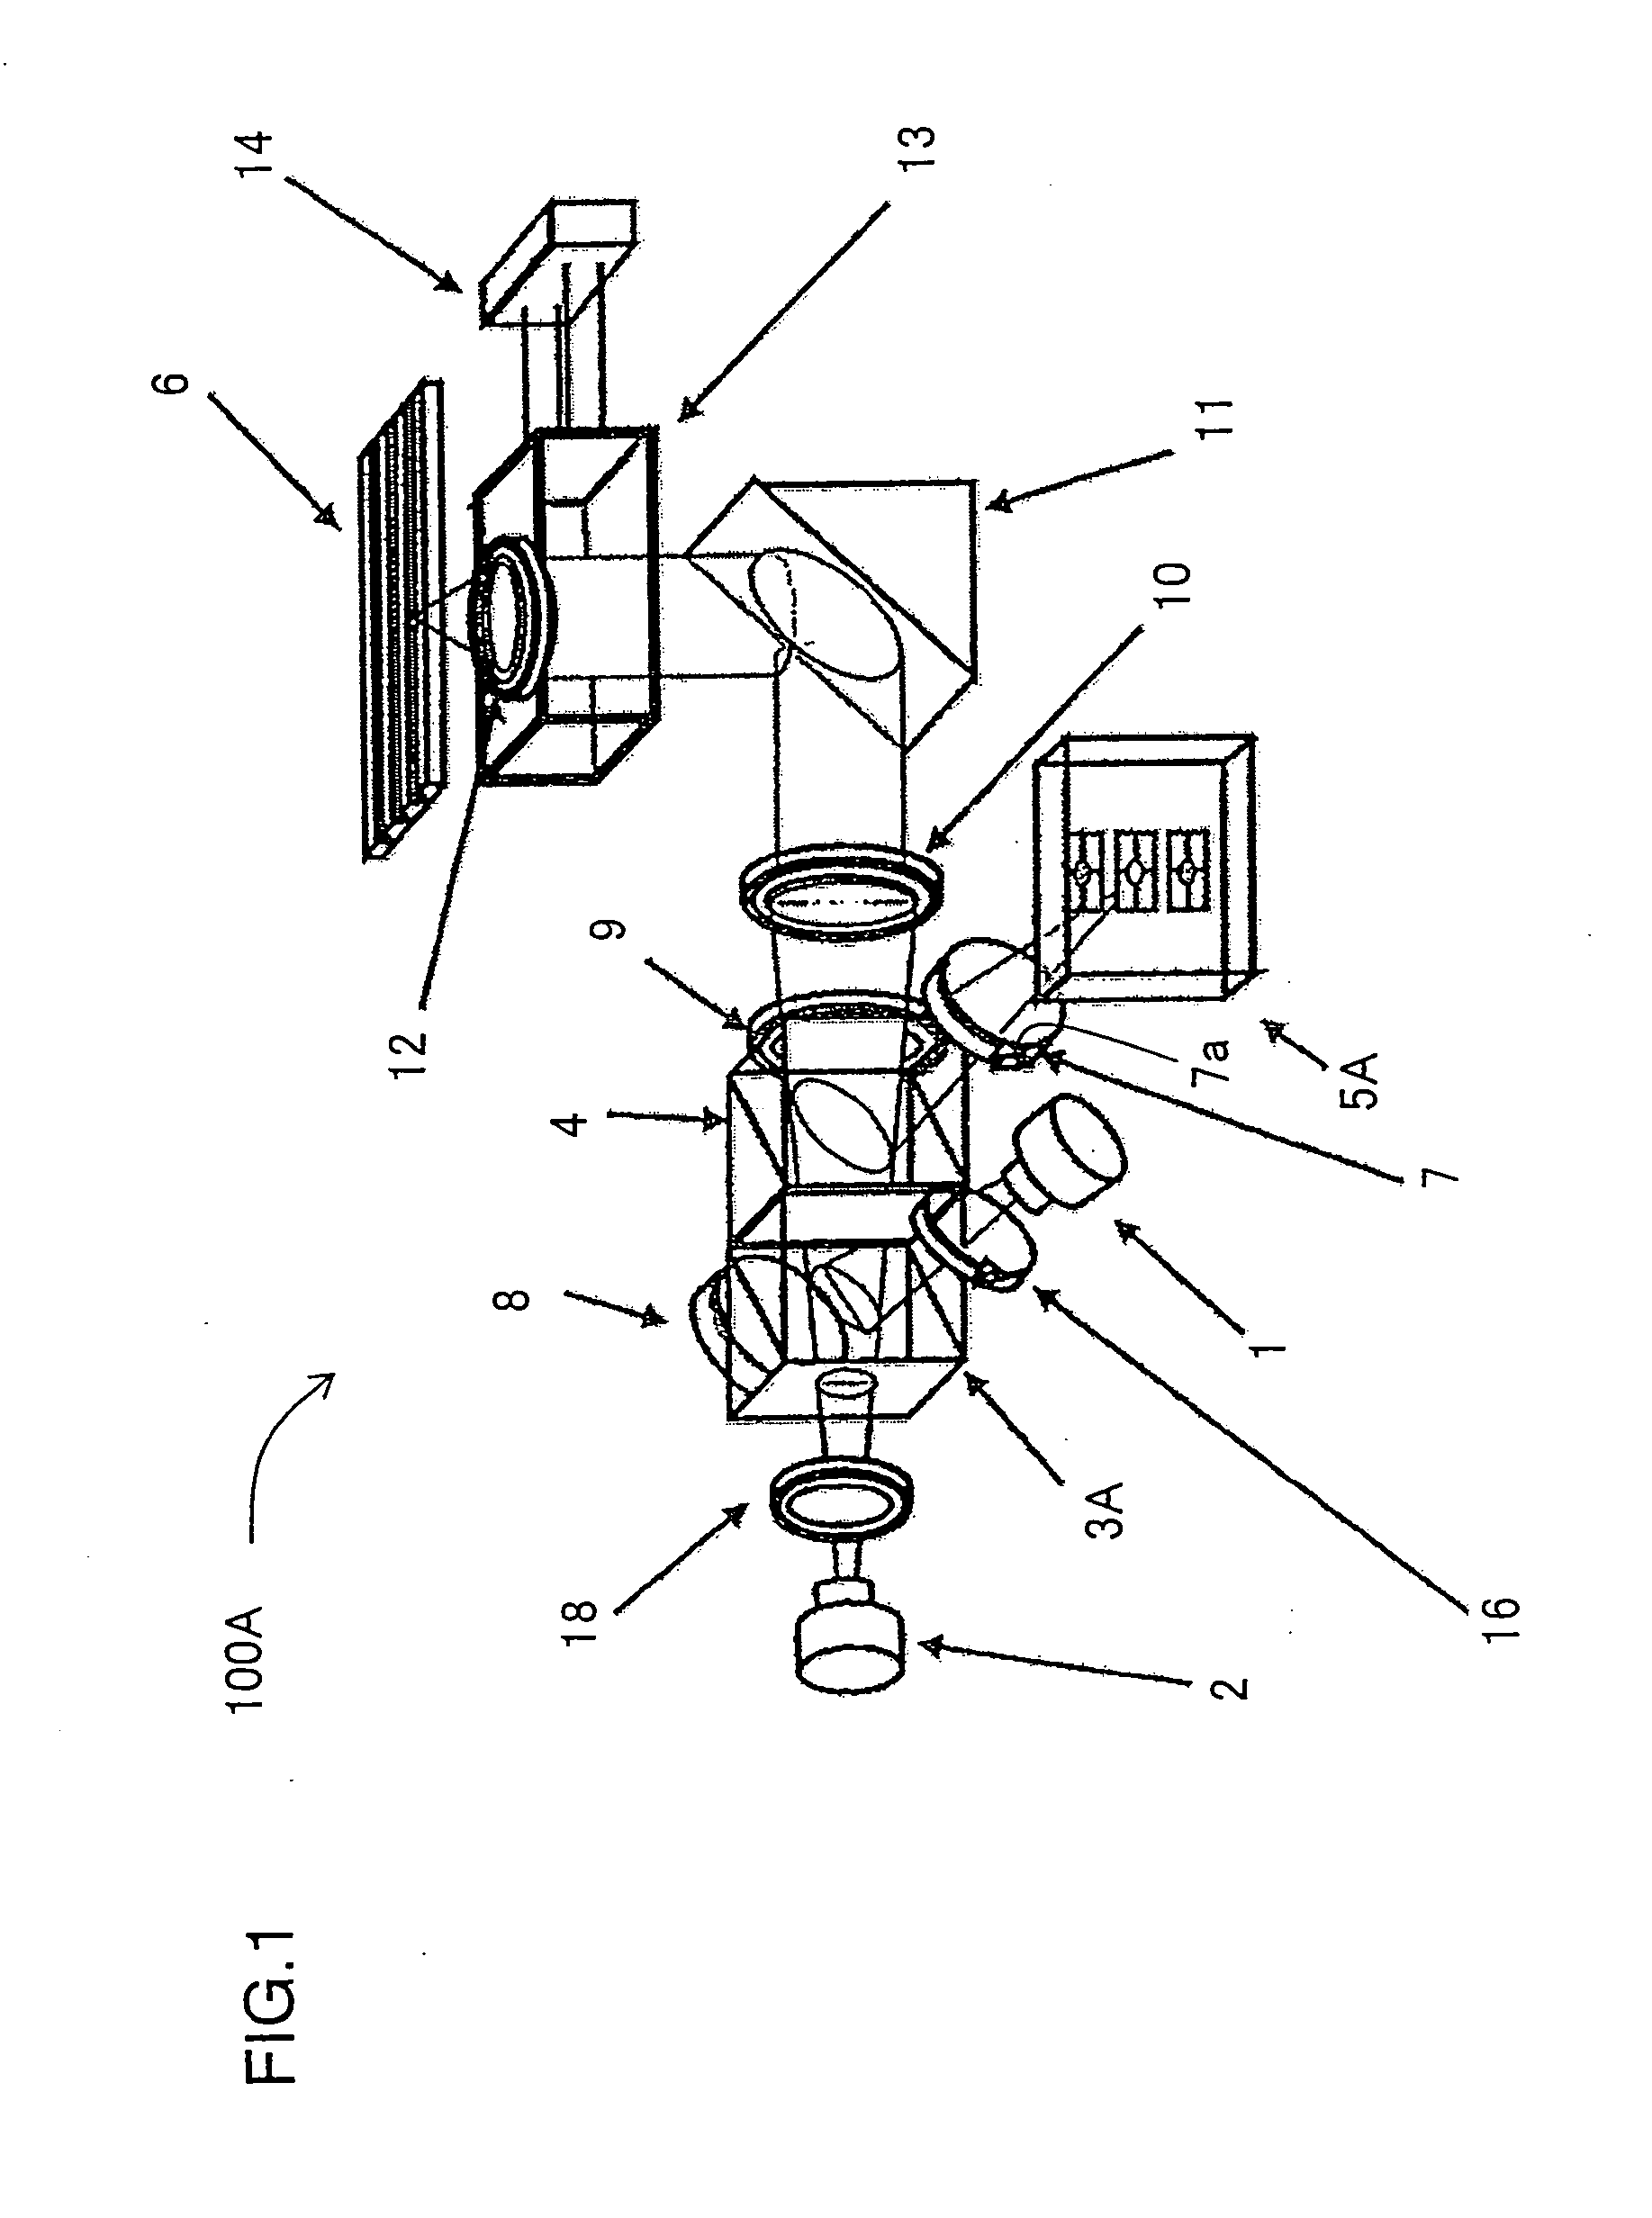 Optical pickup device and information recording/reproducing apparatus